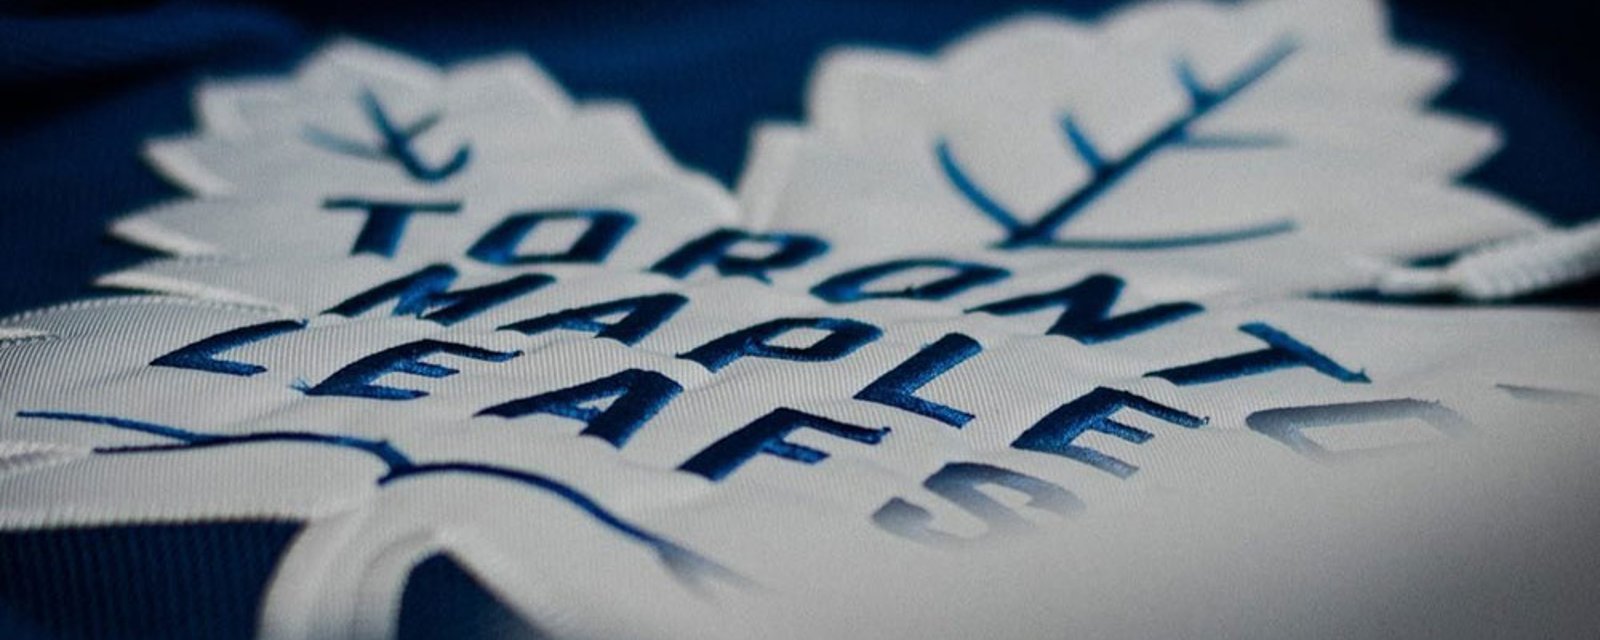 Leafs organization loses 20 players to free agency today in freak situation